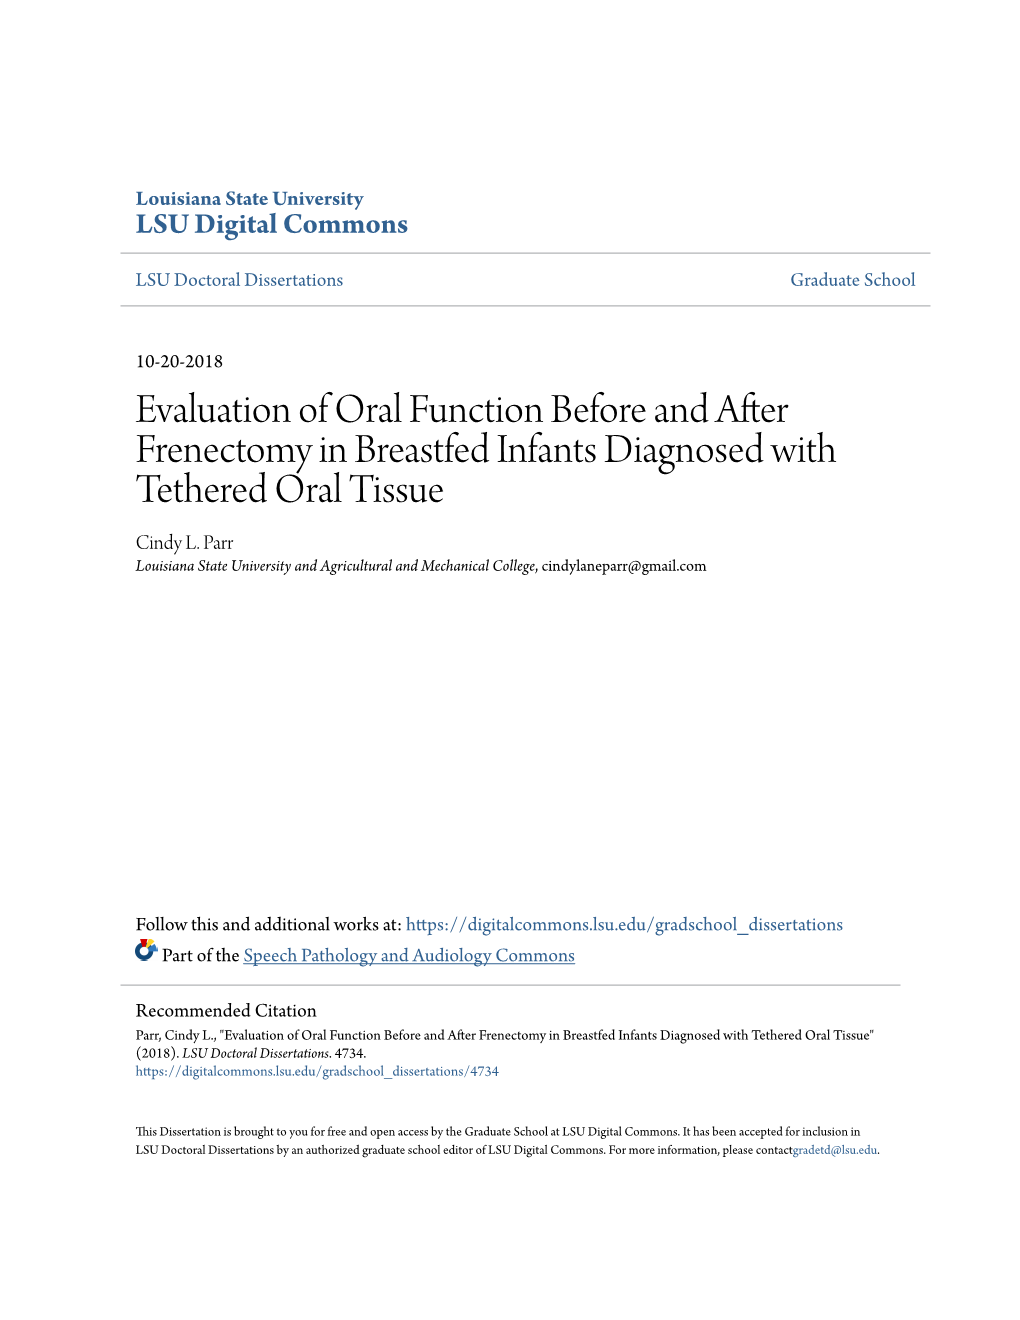 Evaluation of Oral Function Before and After Frenectomy in Breastfed Infants Diagnosed with Tethered Oral Tissue Cindy L